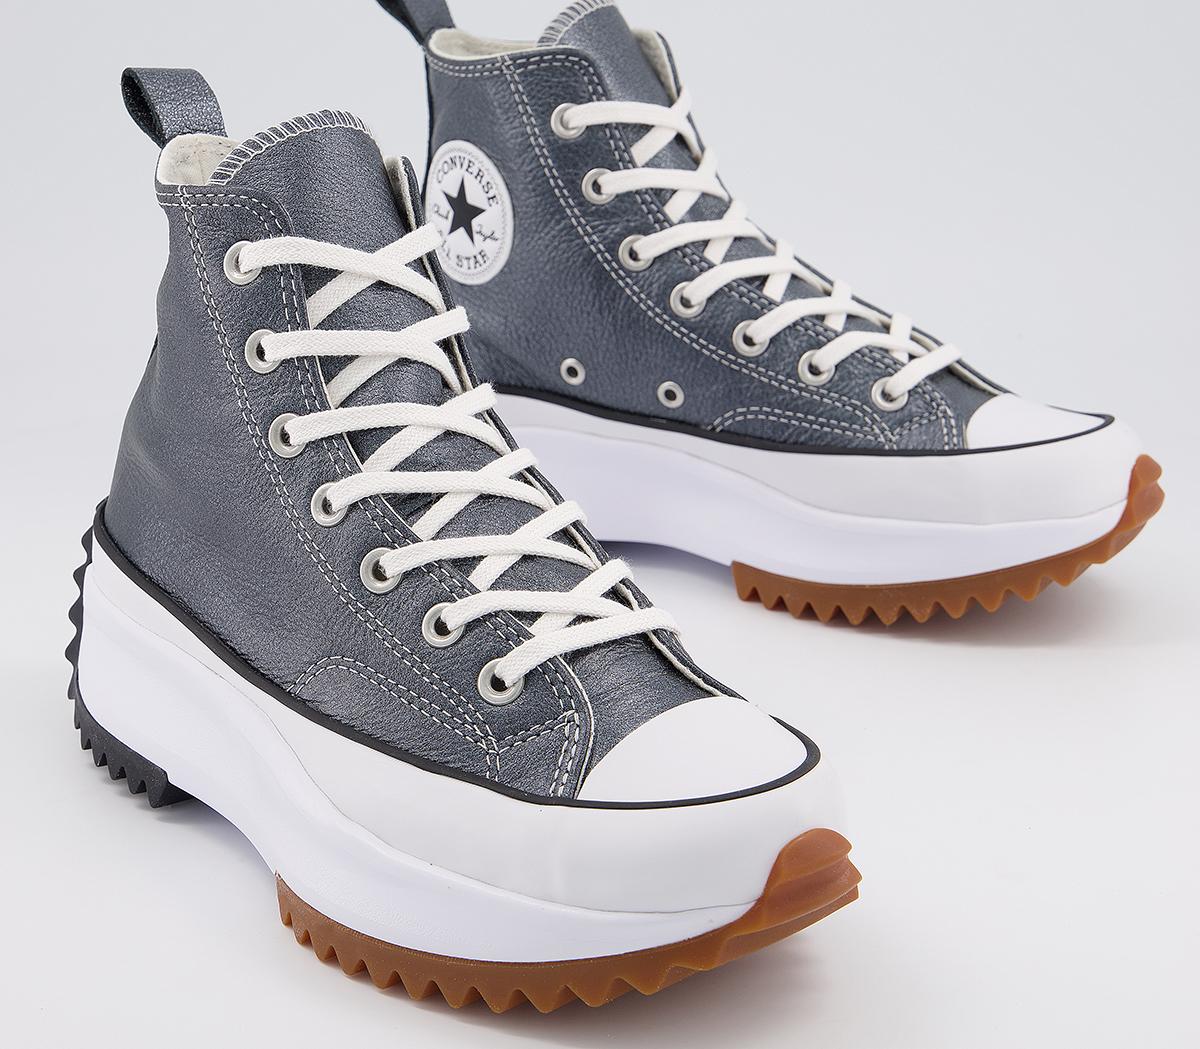 Converse Run Star Hike Trainers Egret Pearl Leather White Black - His ...